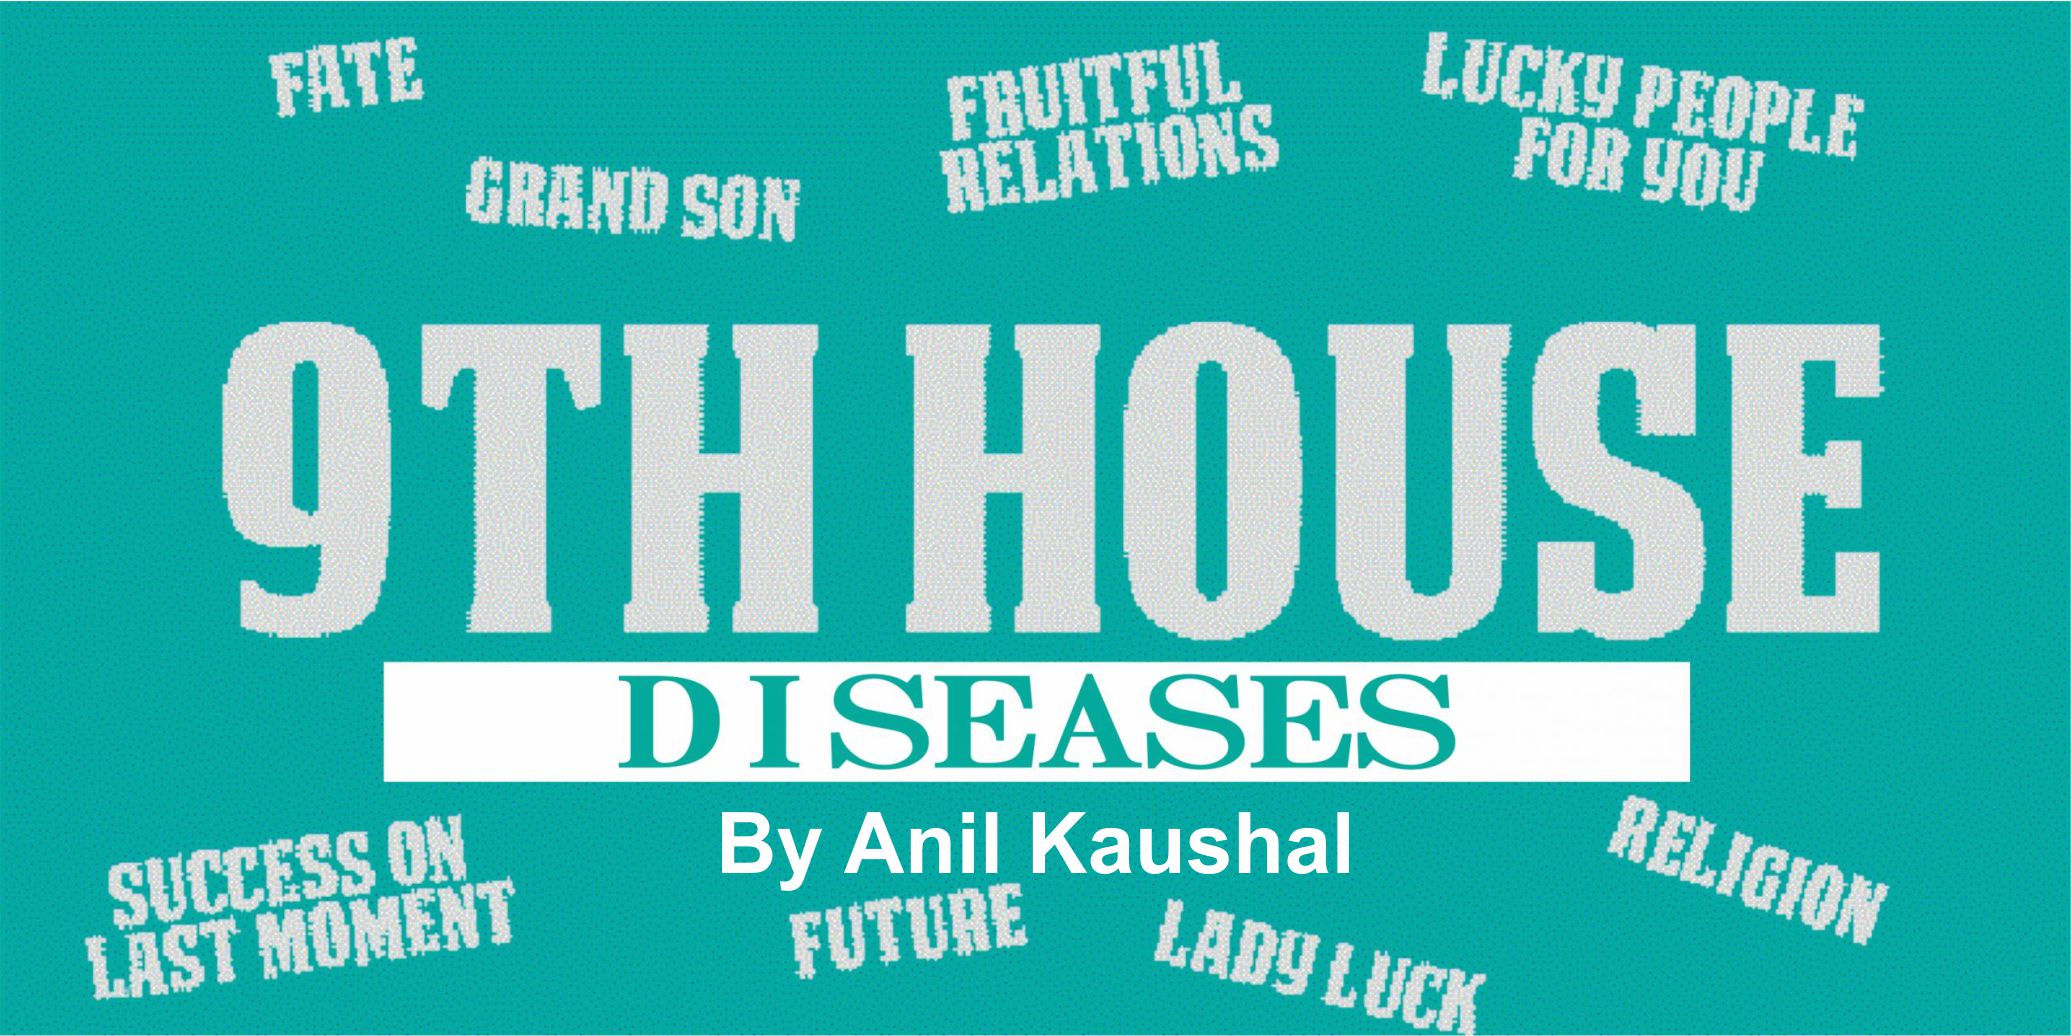 Diseases of Ninth house